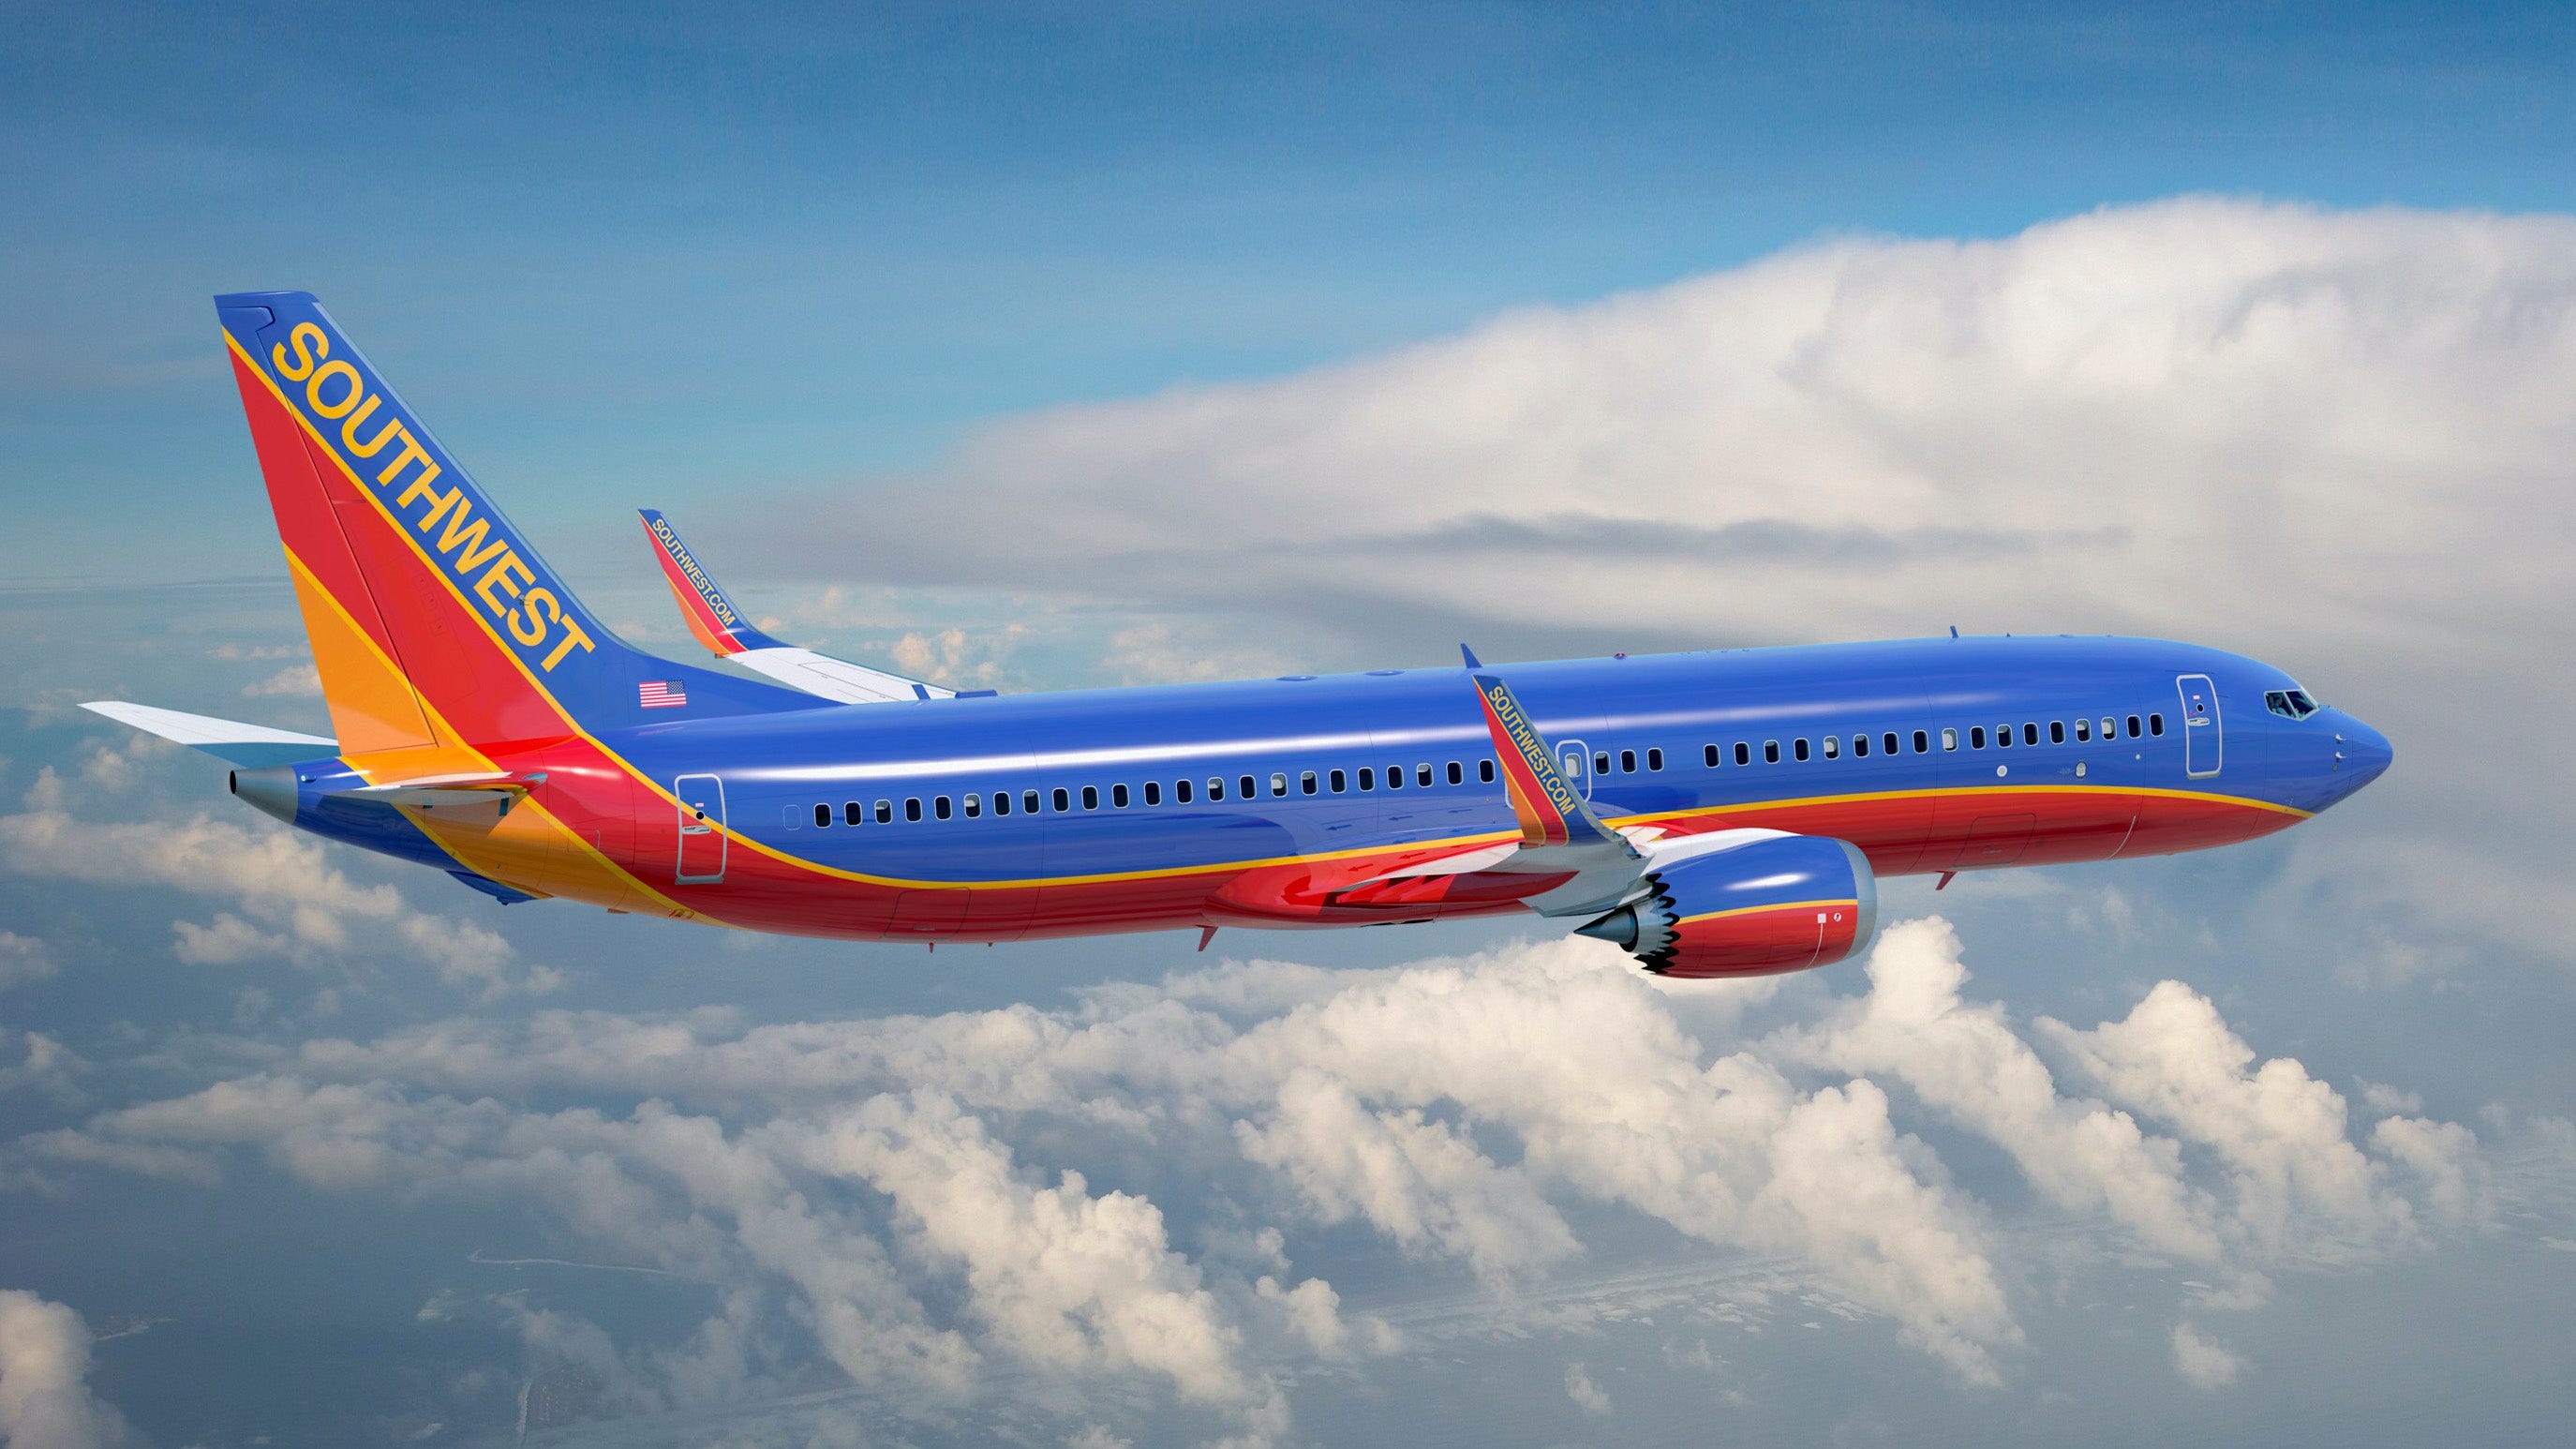 southwest airlines reviews open seating